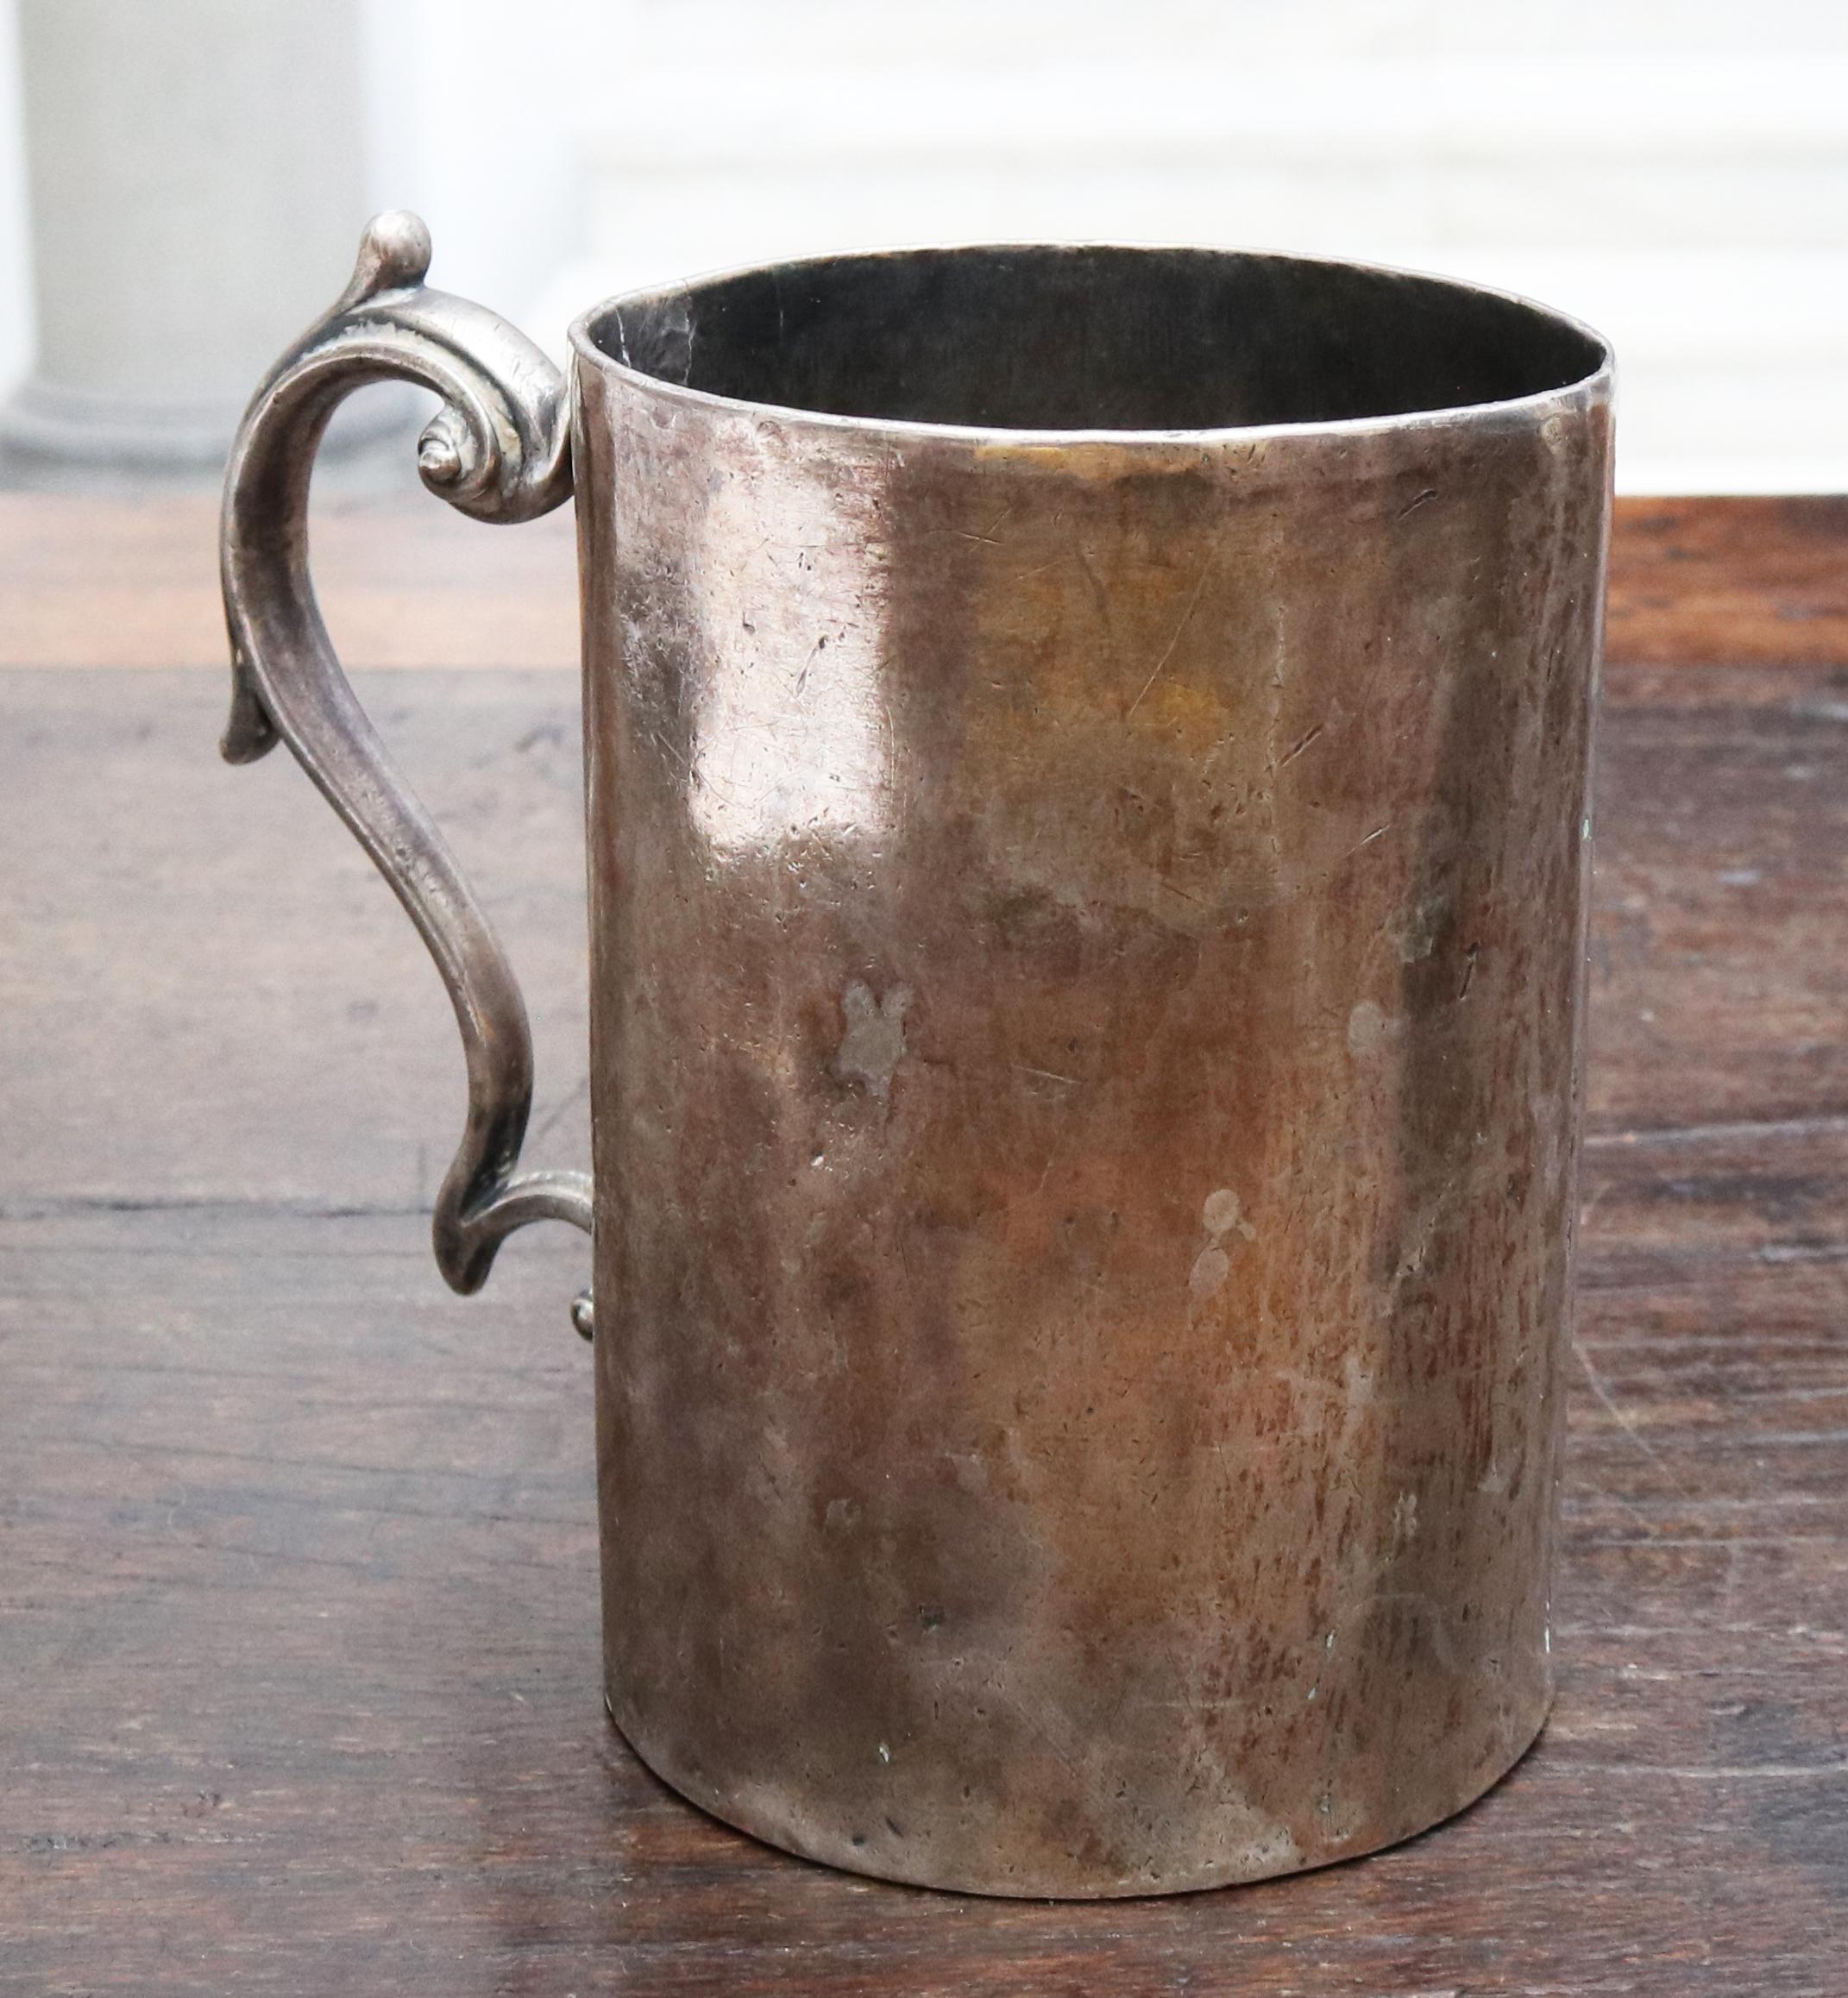 18th century silver cup with handle, possibly Bolivian. 

Total silver by weight: 450g